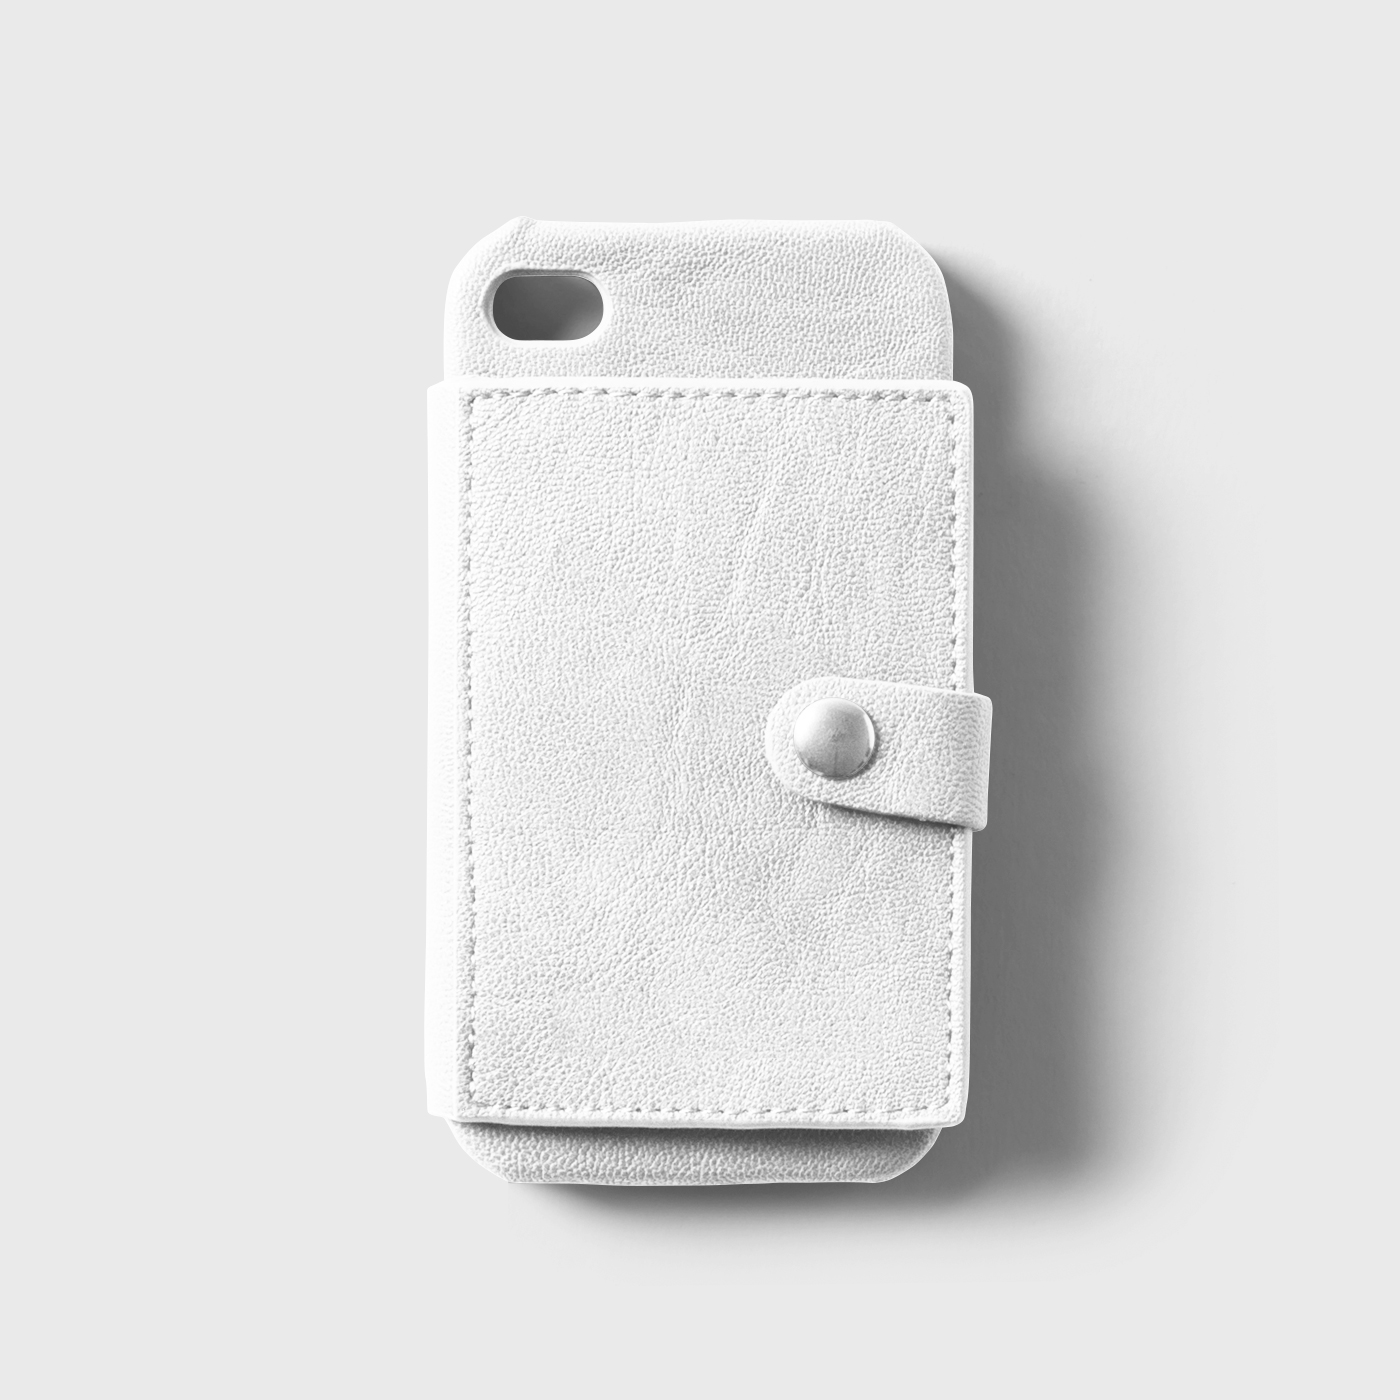 Front View of Vertical Leather Phone Case Mockup FREE PSD